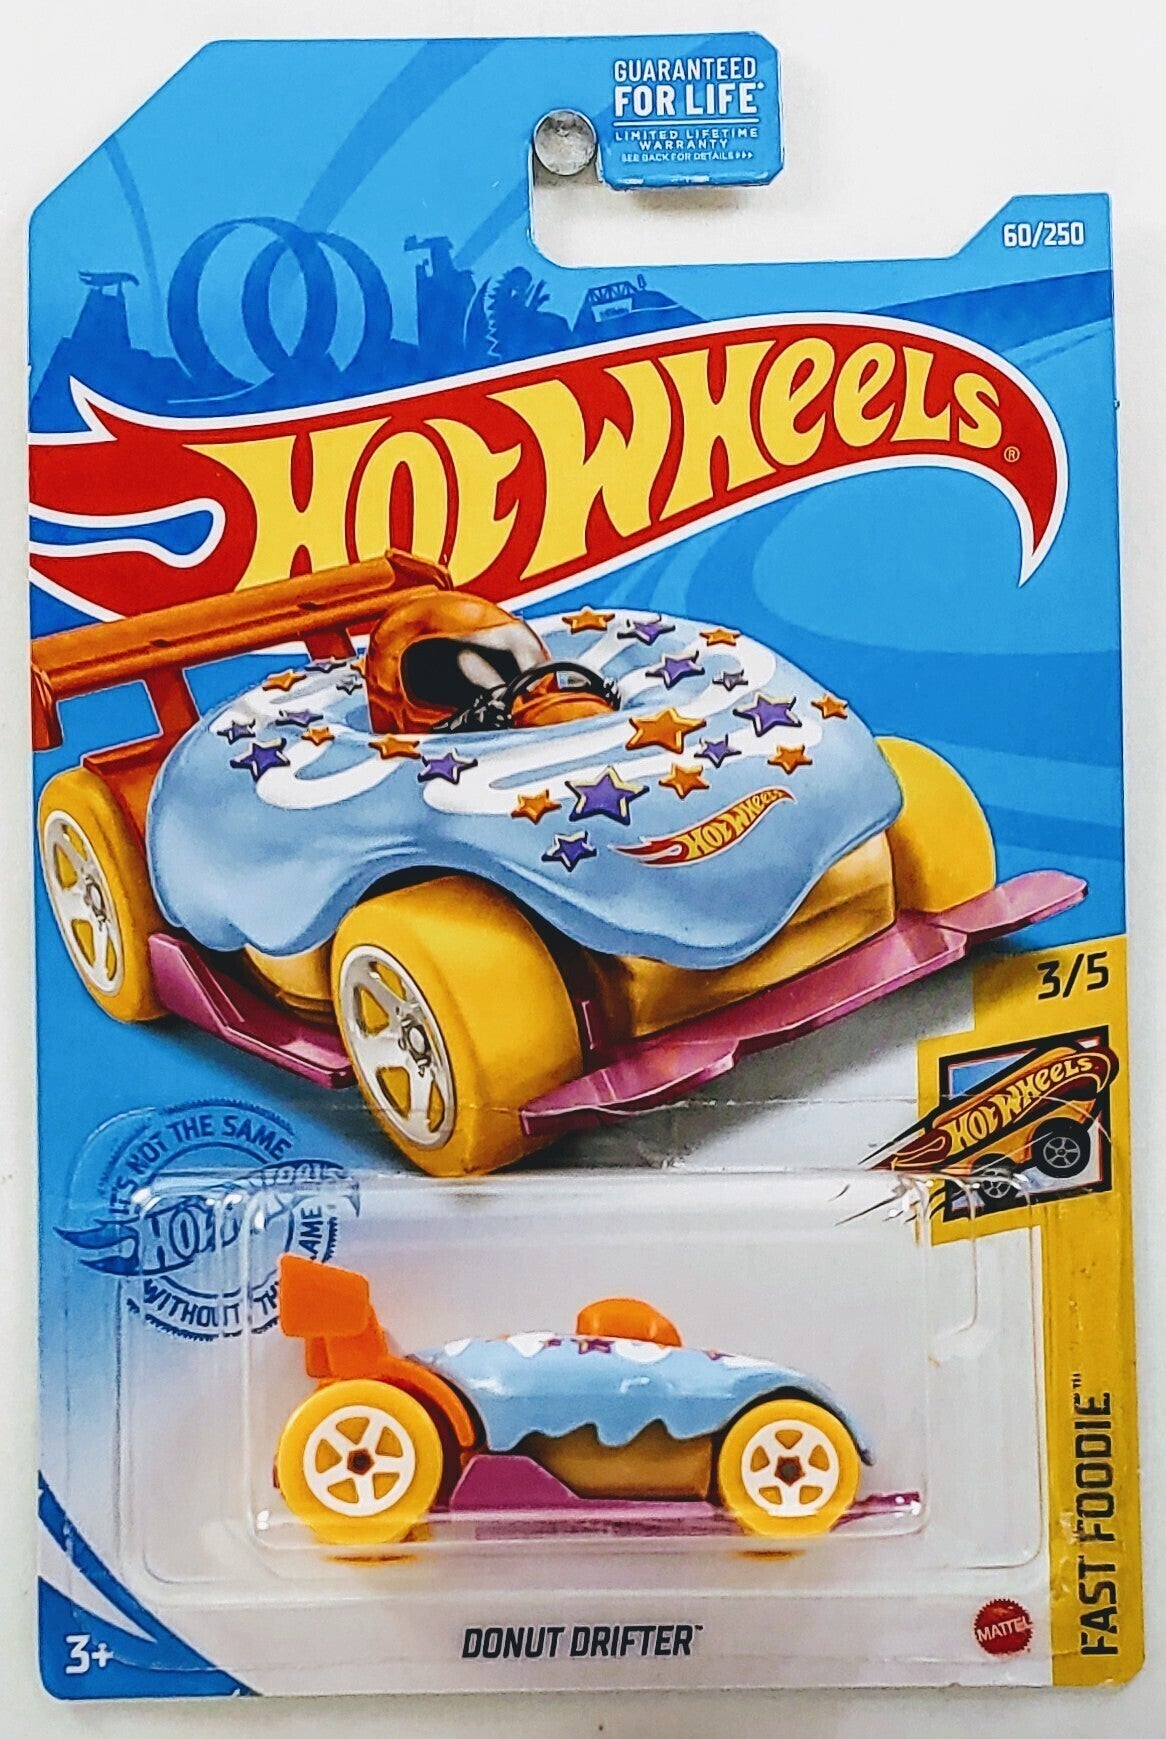 Hot Wheels 2021 - Collector # 060/250 - Fast Foodie 3/5 - Donut Drifter - Light Blue with Sprinkles